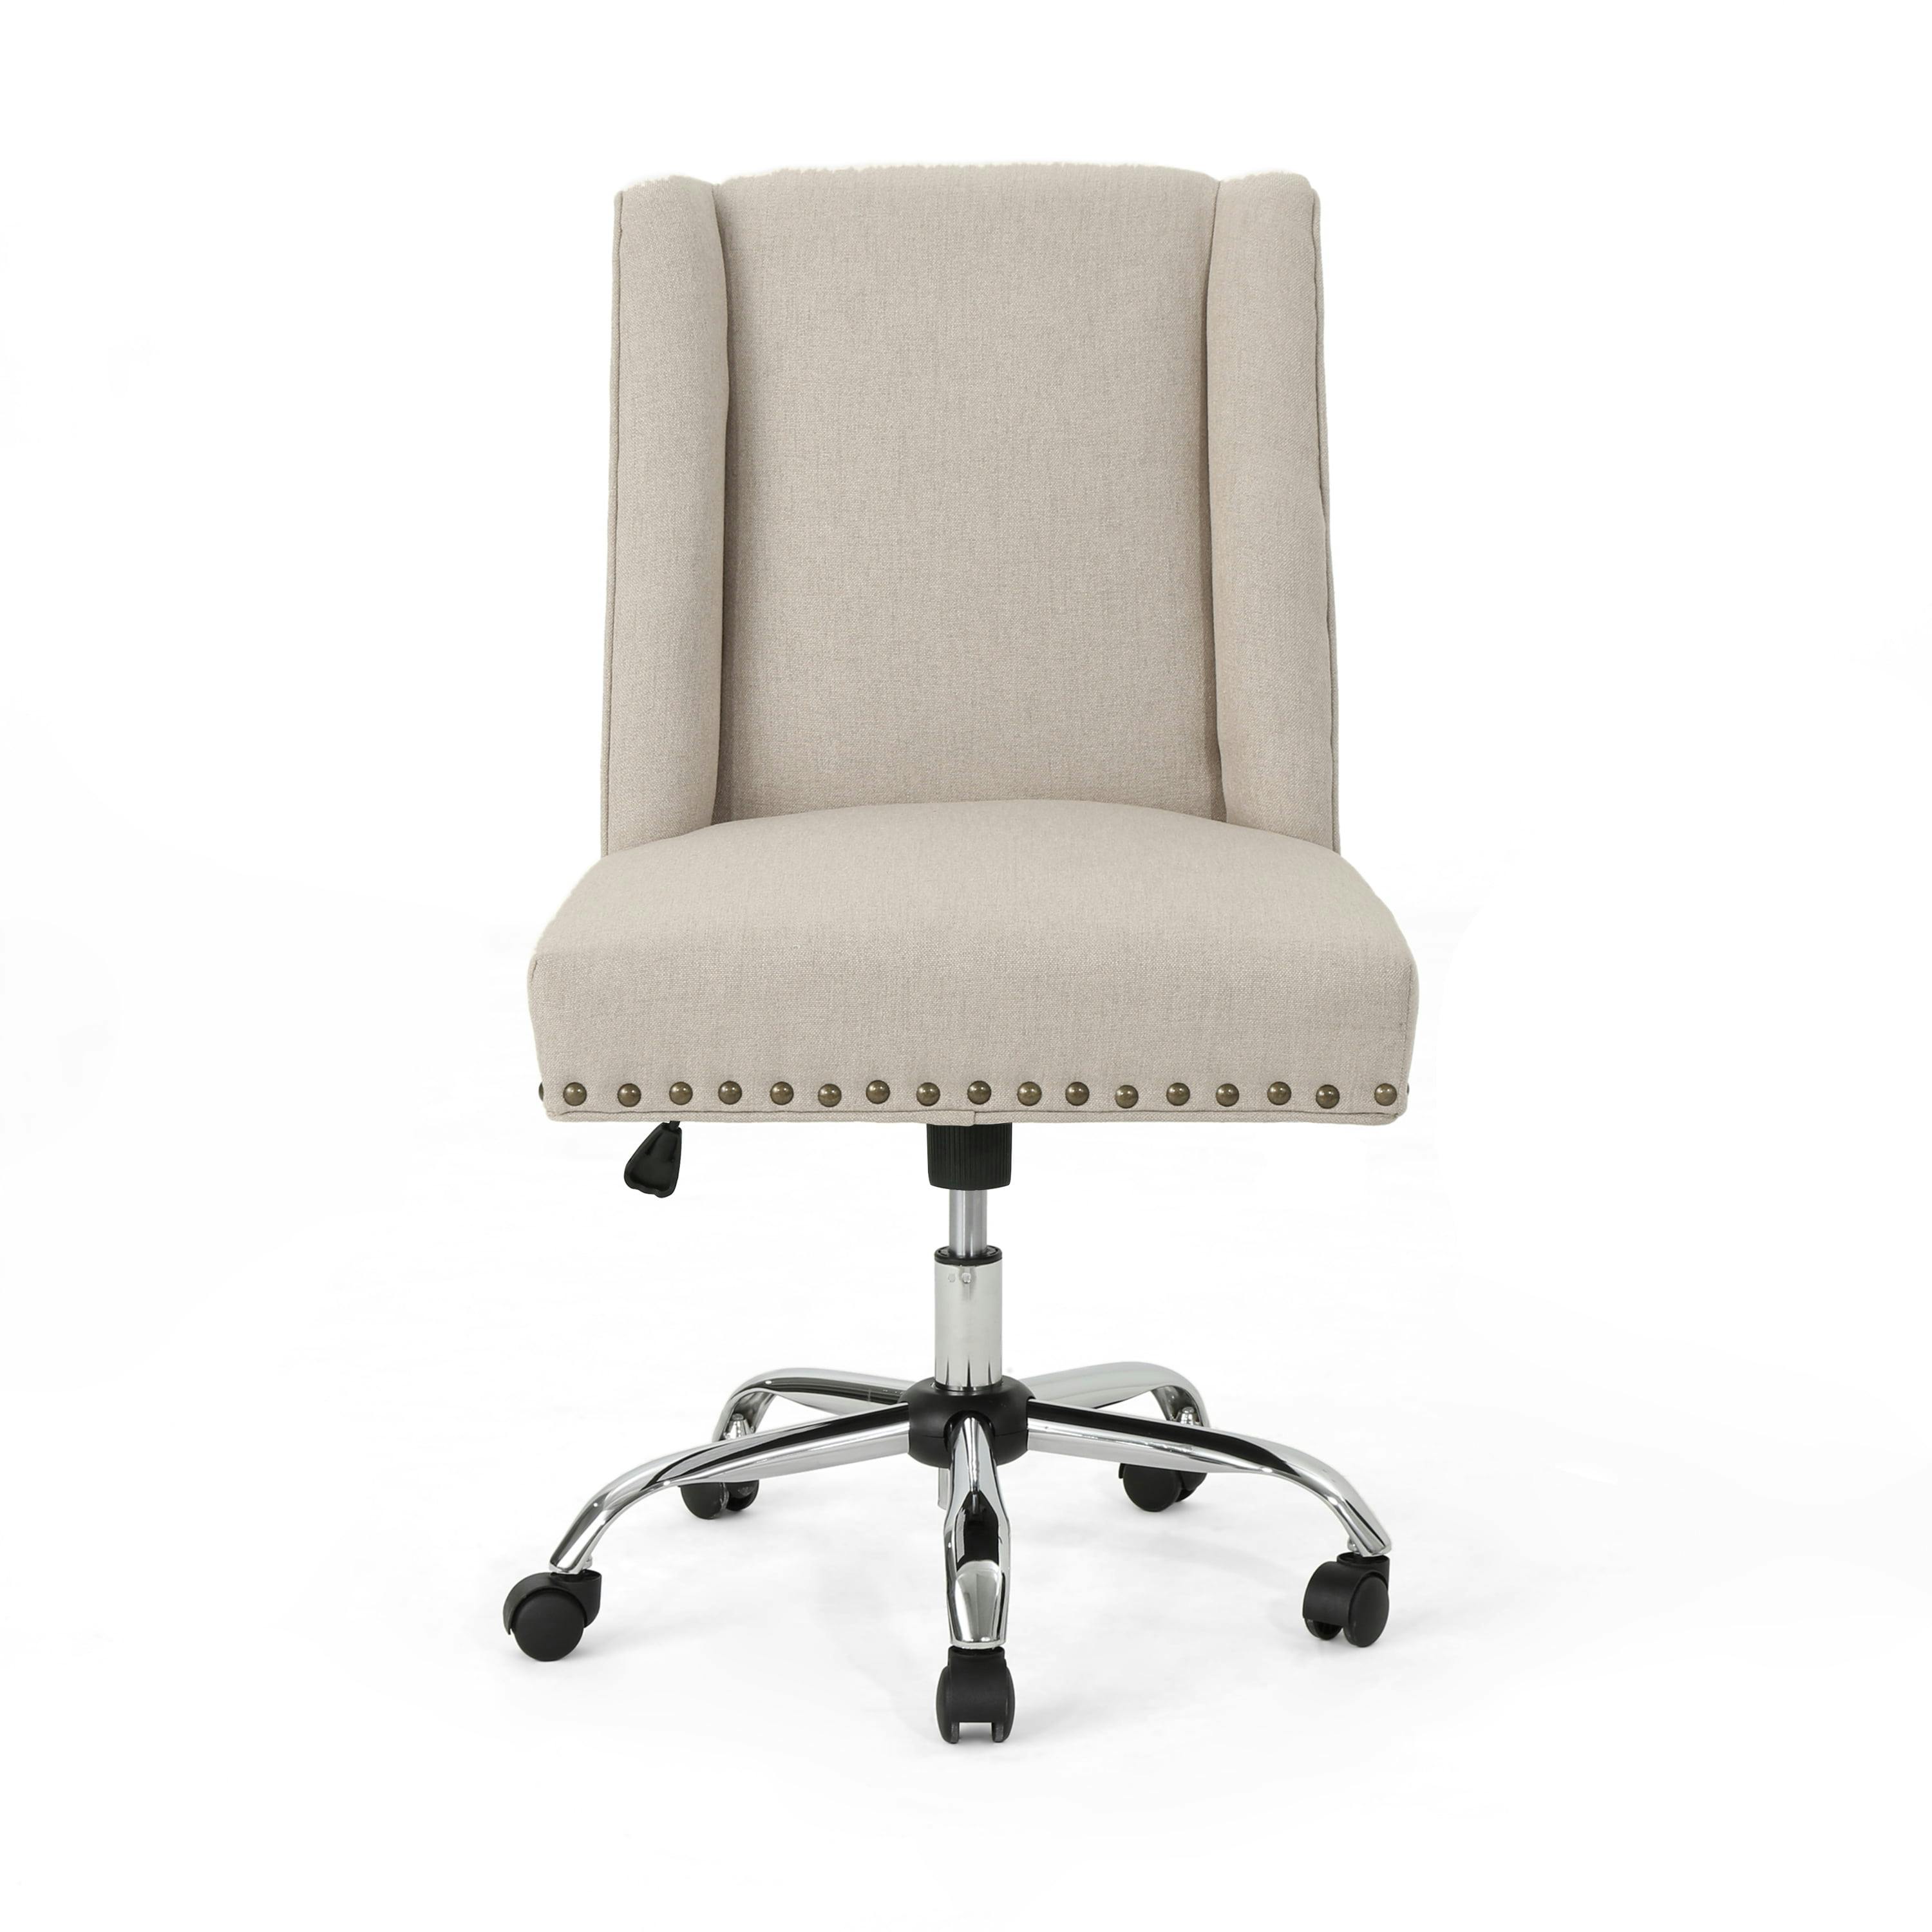 Contemporary Wheat Fabric Swivel Office Chair with Chrome Finish and Nailhead Trim